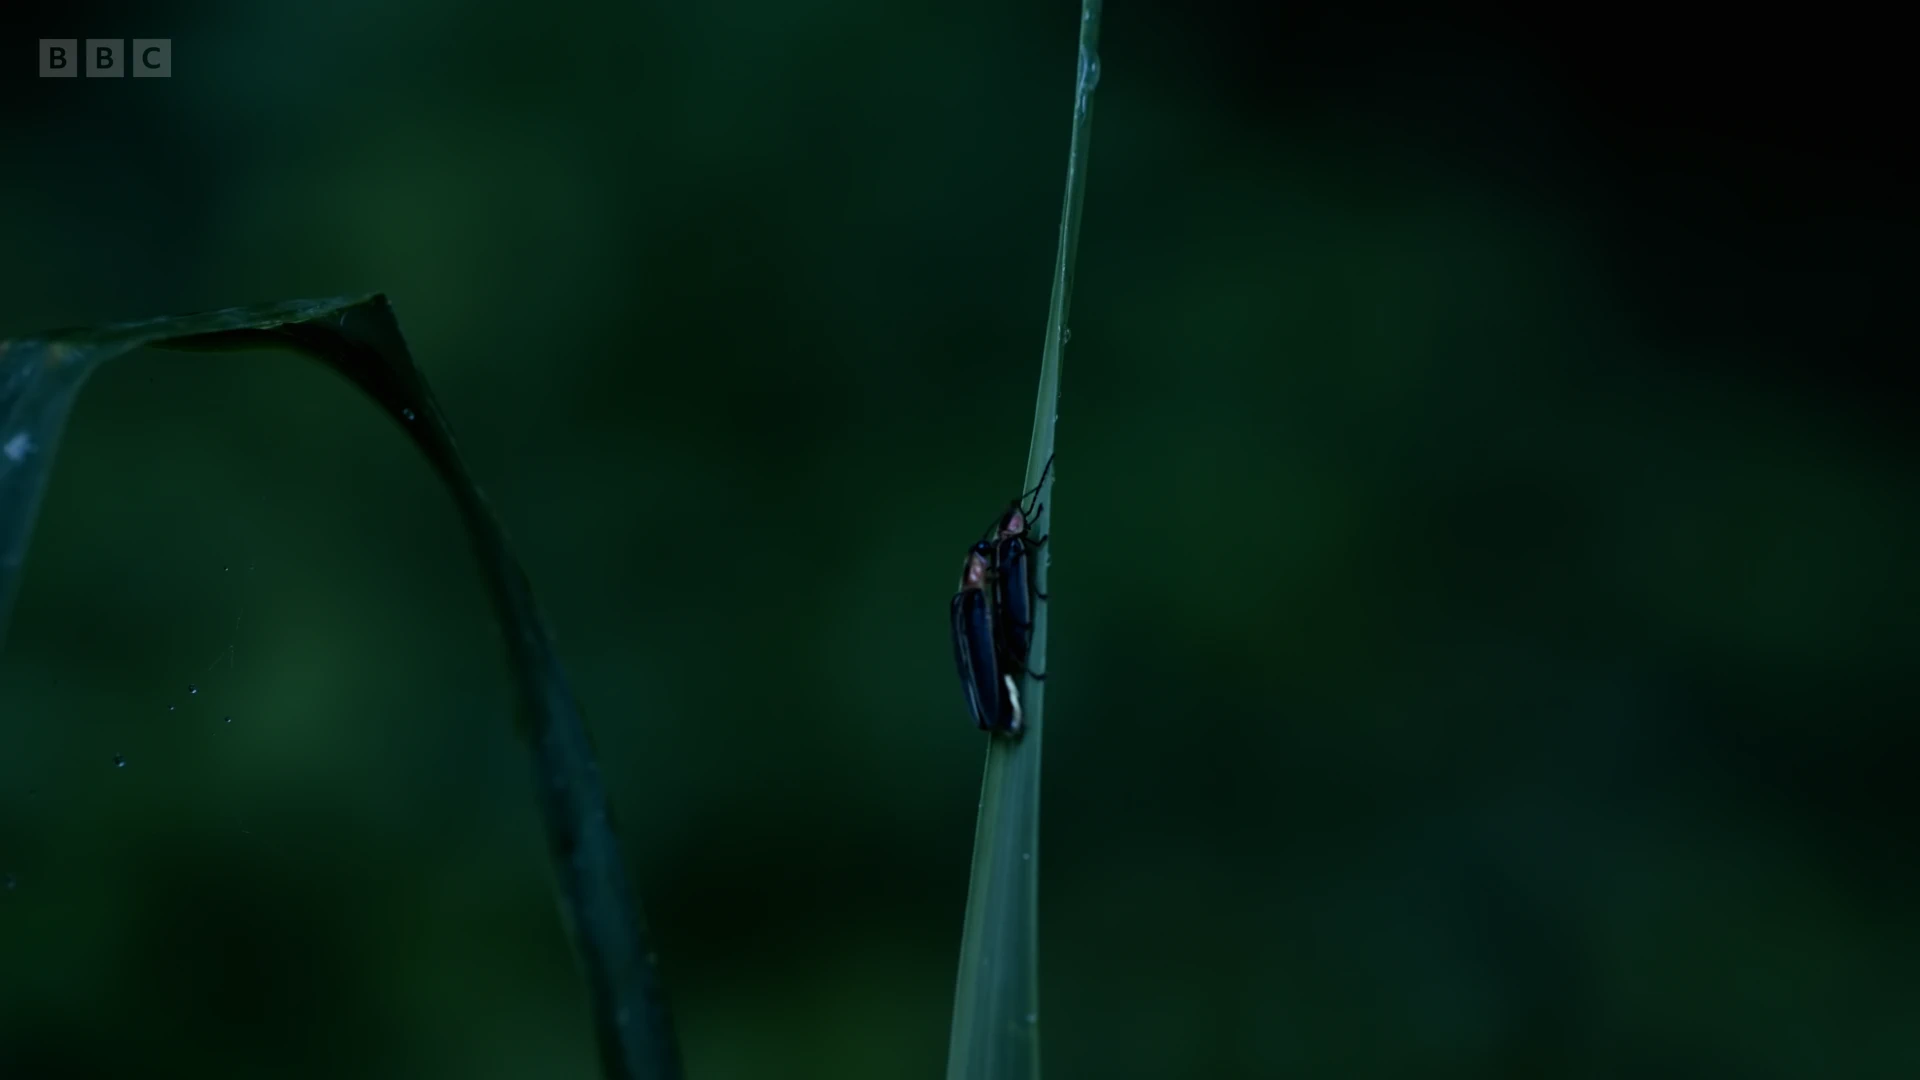 Firefly (Photuris frontalis) as shown in Seven Worlds, One Planet - North America